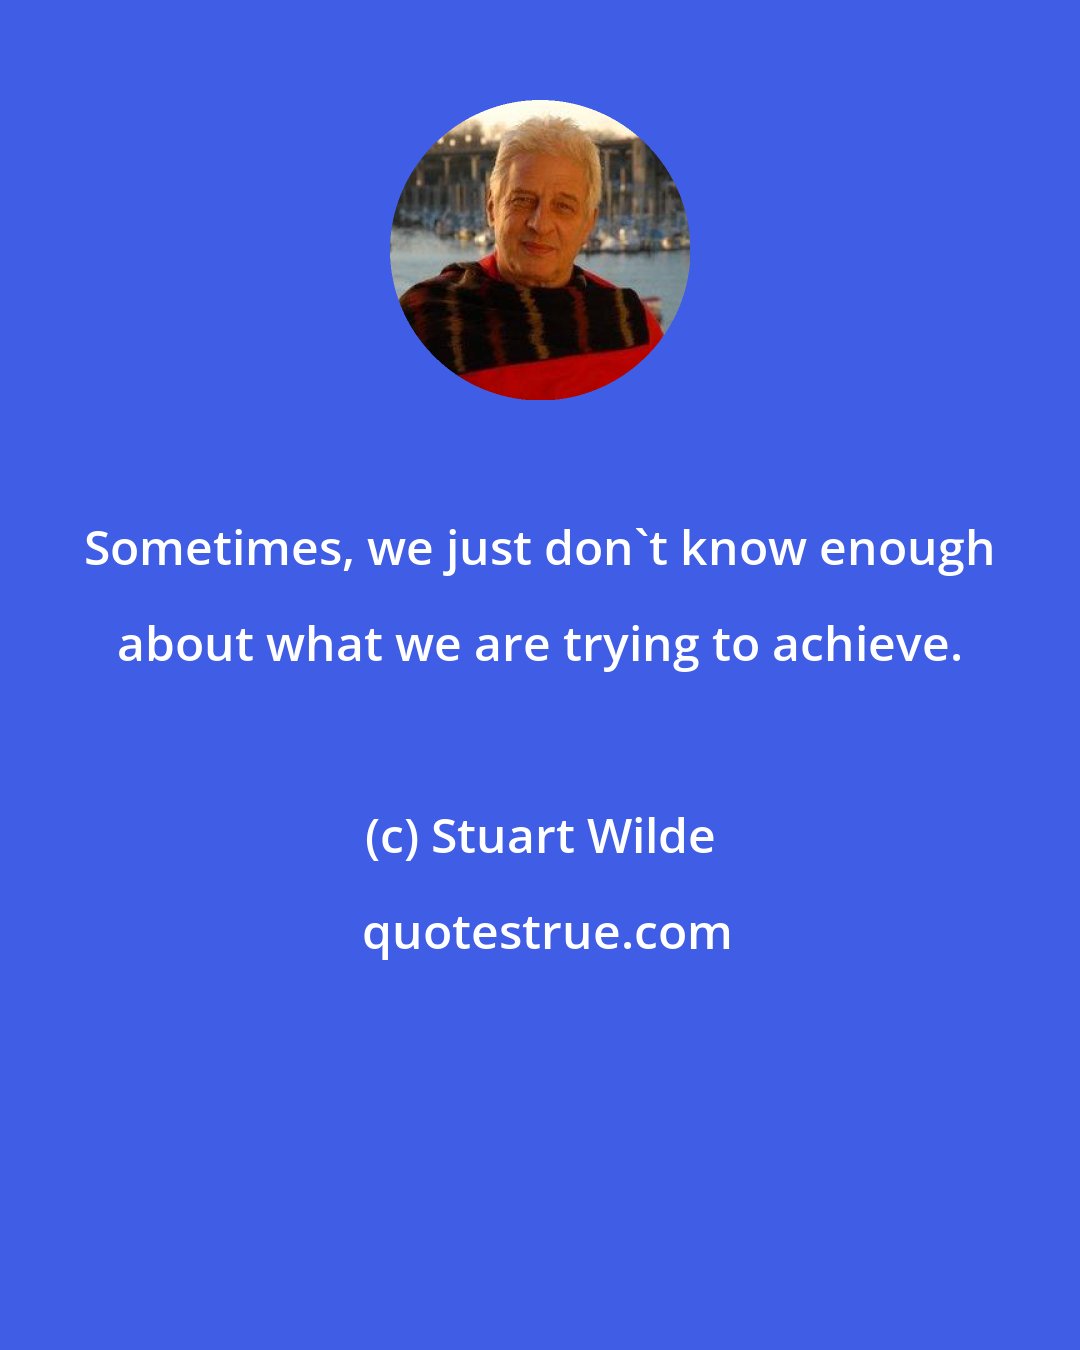 Stuart Wilde: Sometimes, we just don't know enough about what we are trying to achieve.